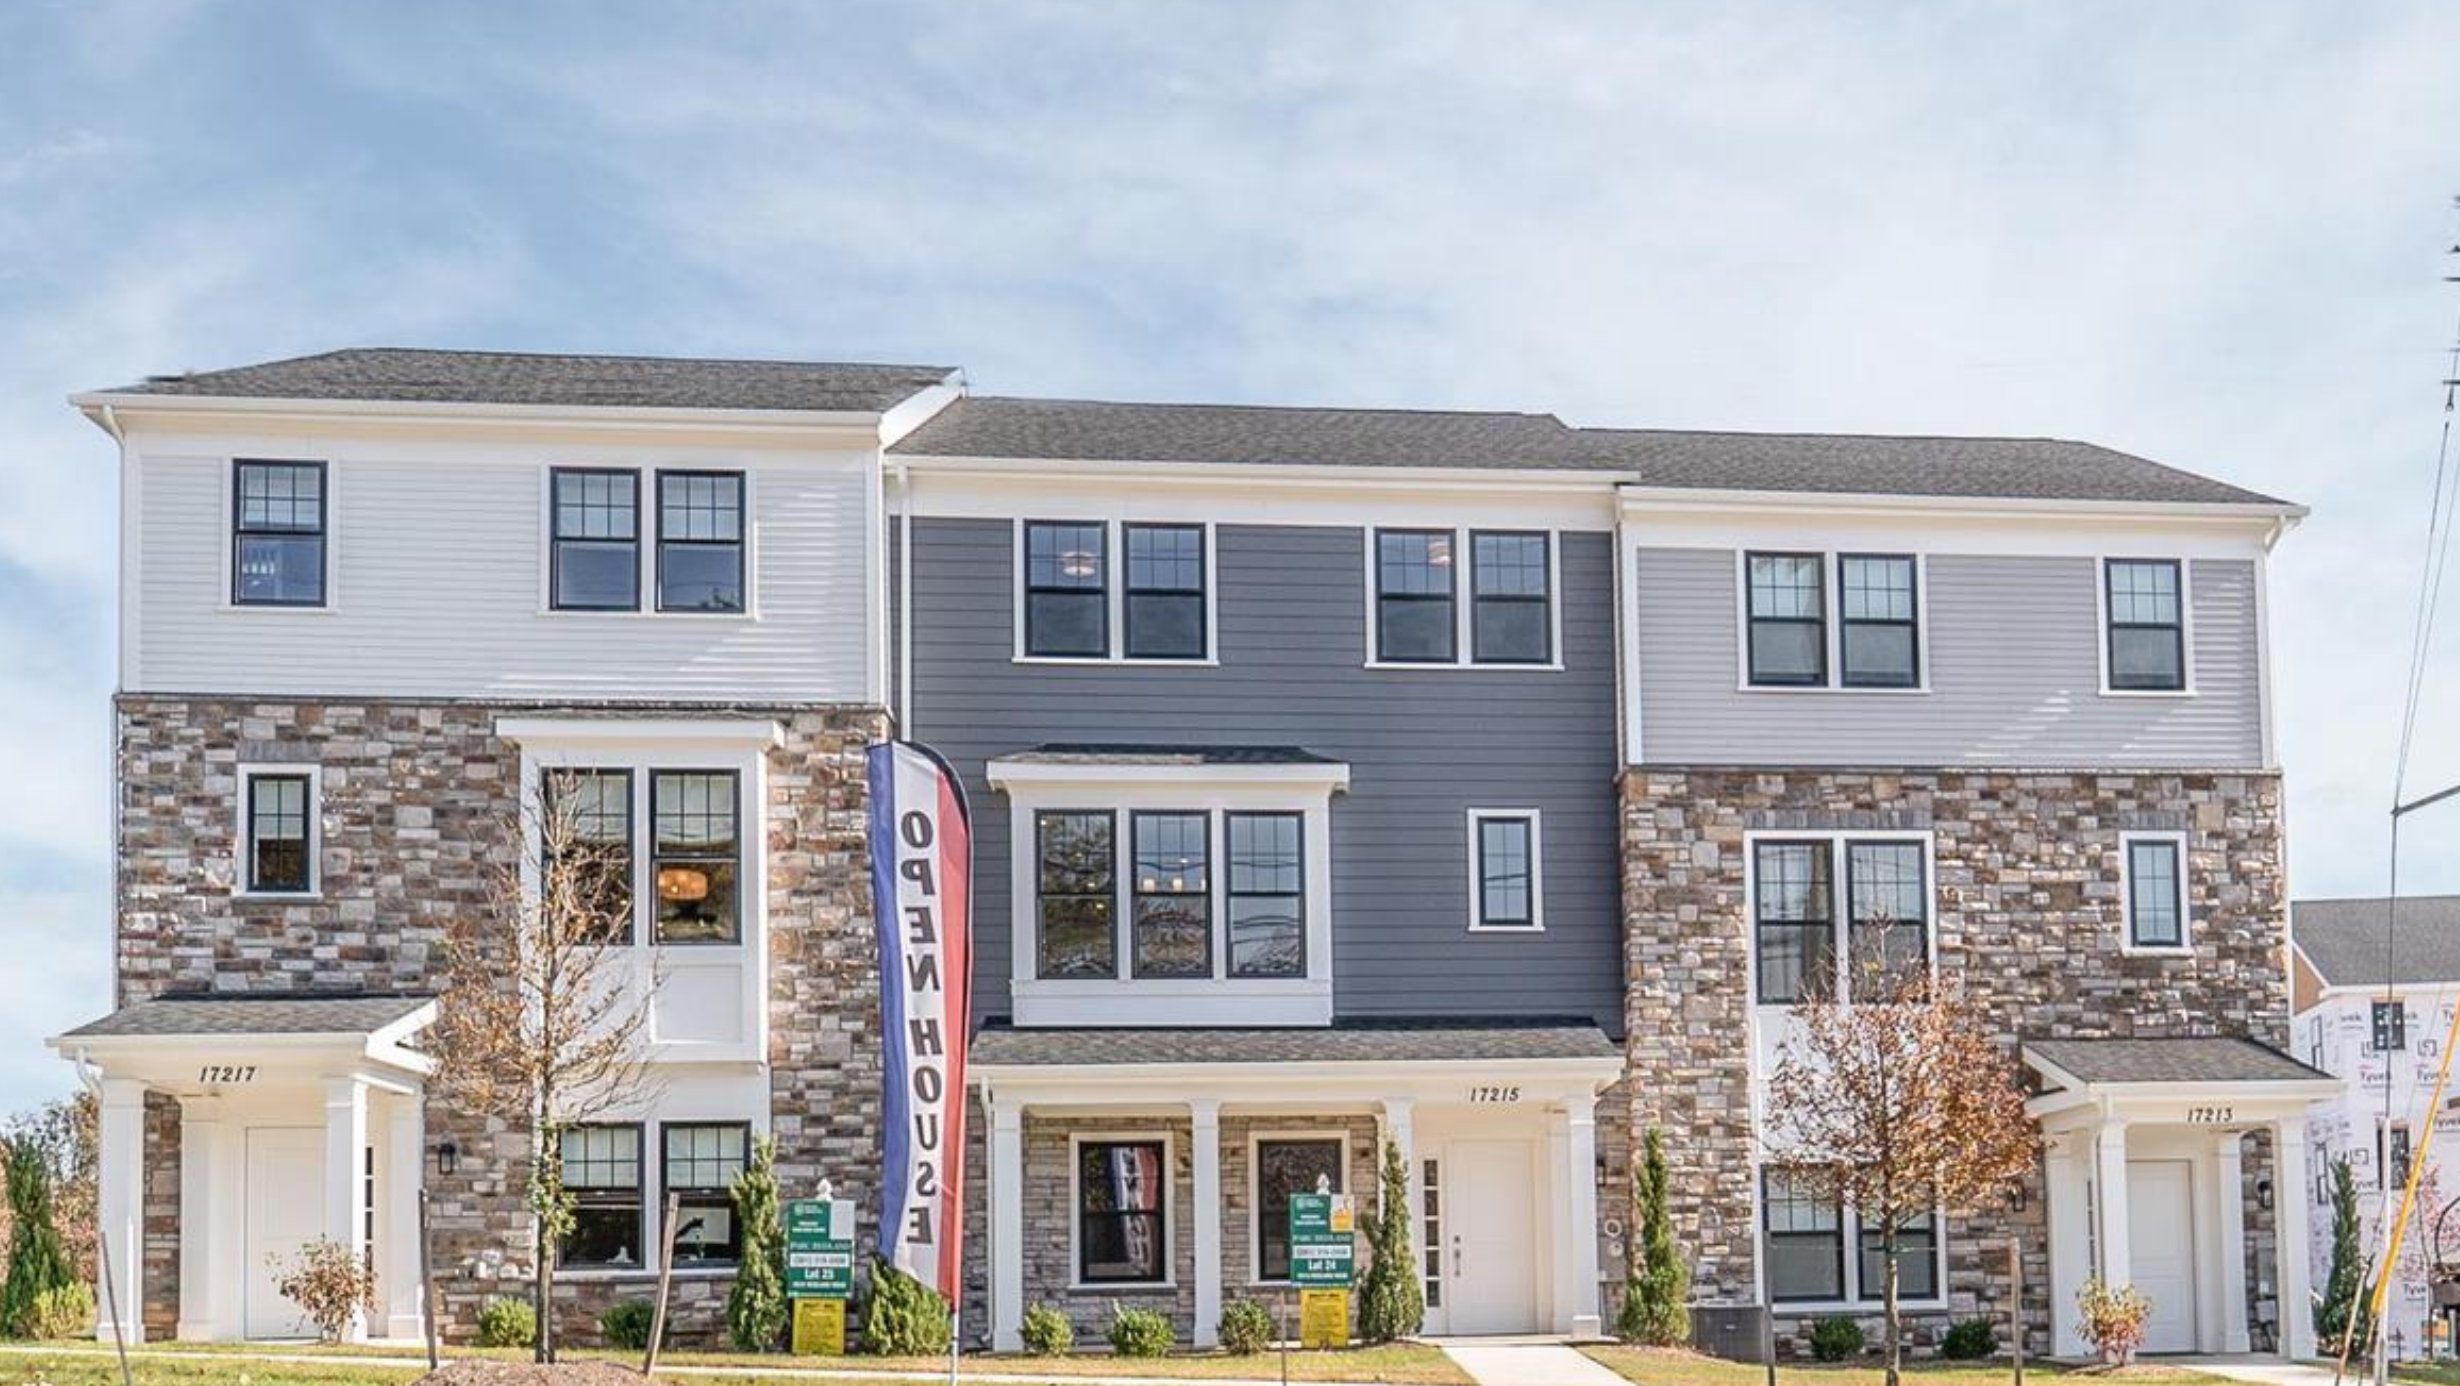 ELEVATOR TOWNHOMES - 7015 UNIVERSAL CT, Rockville, MD 20855